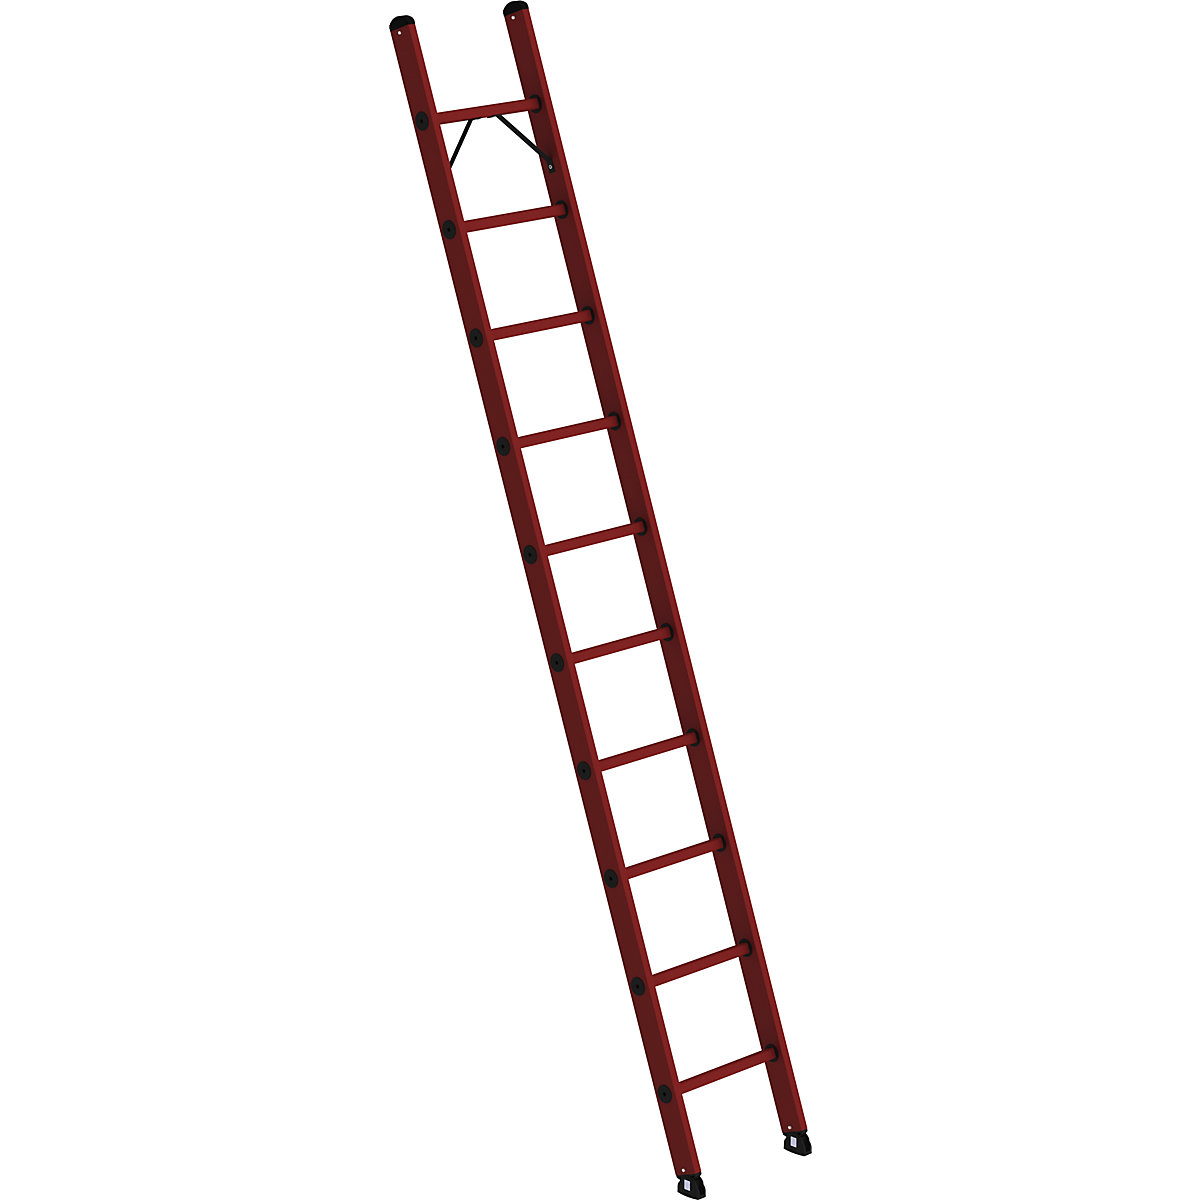 Full plastic lean to ladder – MUNK, made entirely of GRP, 10 rungs-2